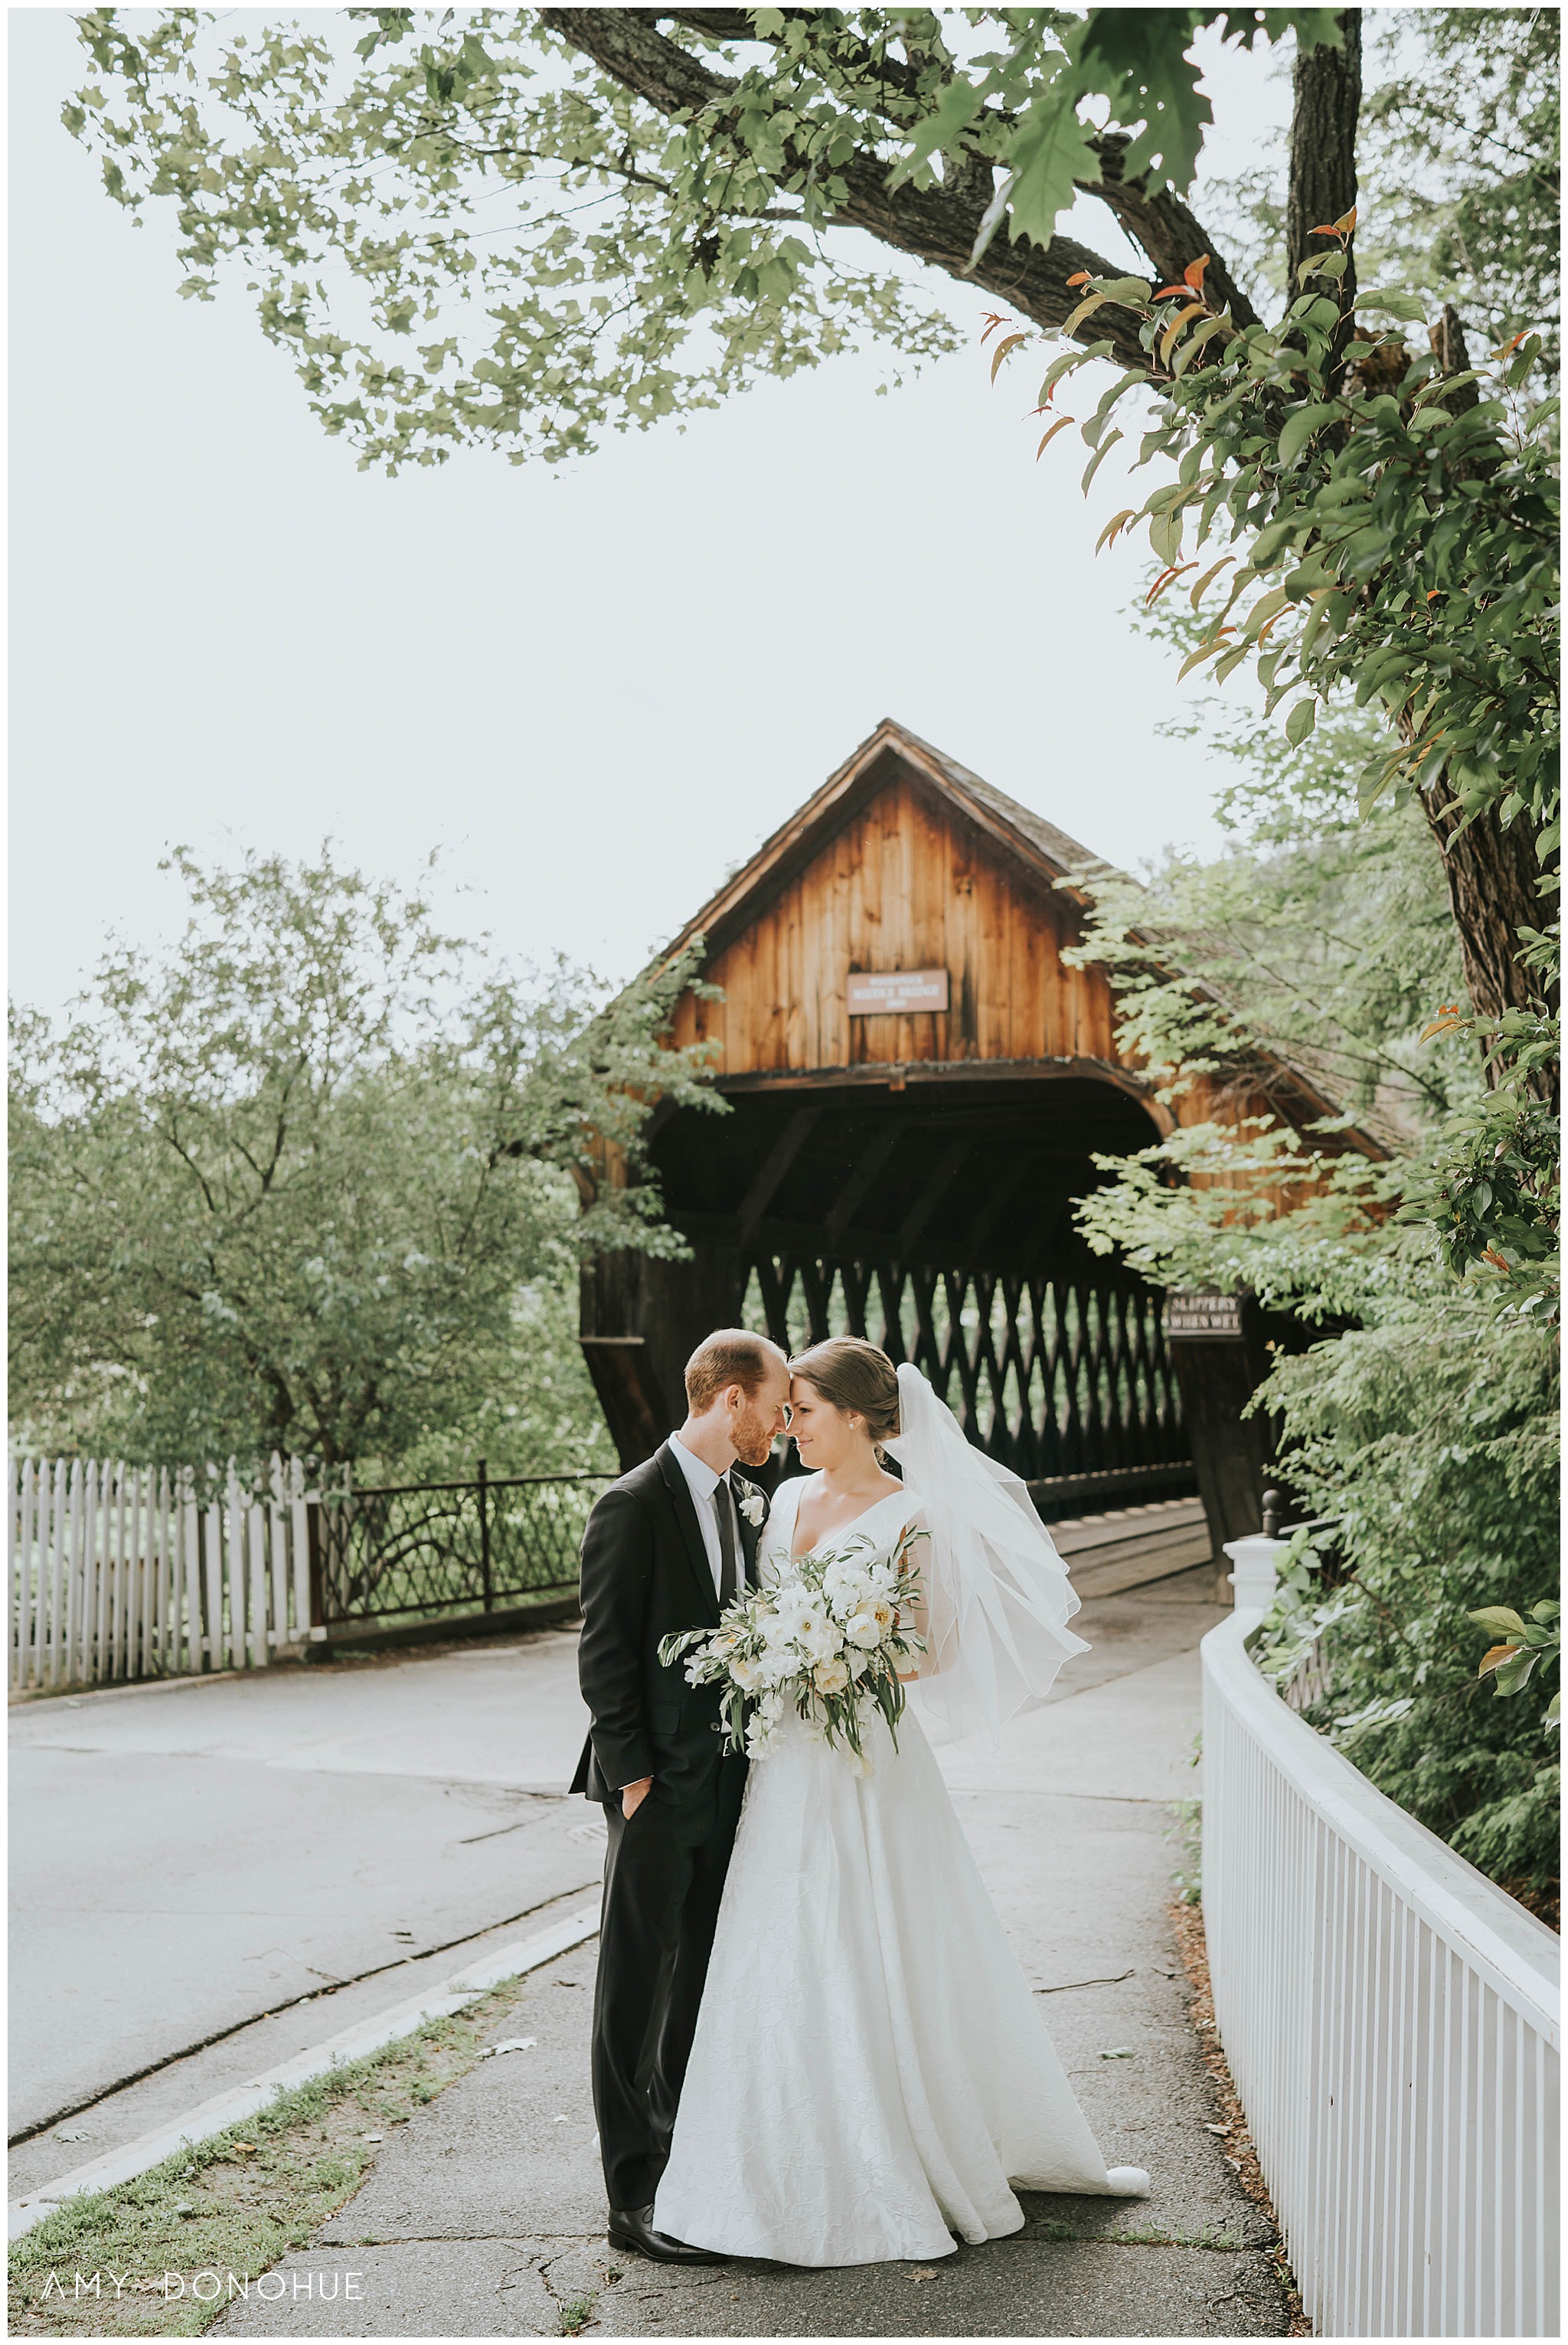 Wedding portraits in front of the covered bridge in Woodstock, Vermont